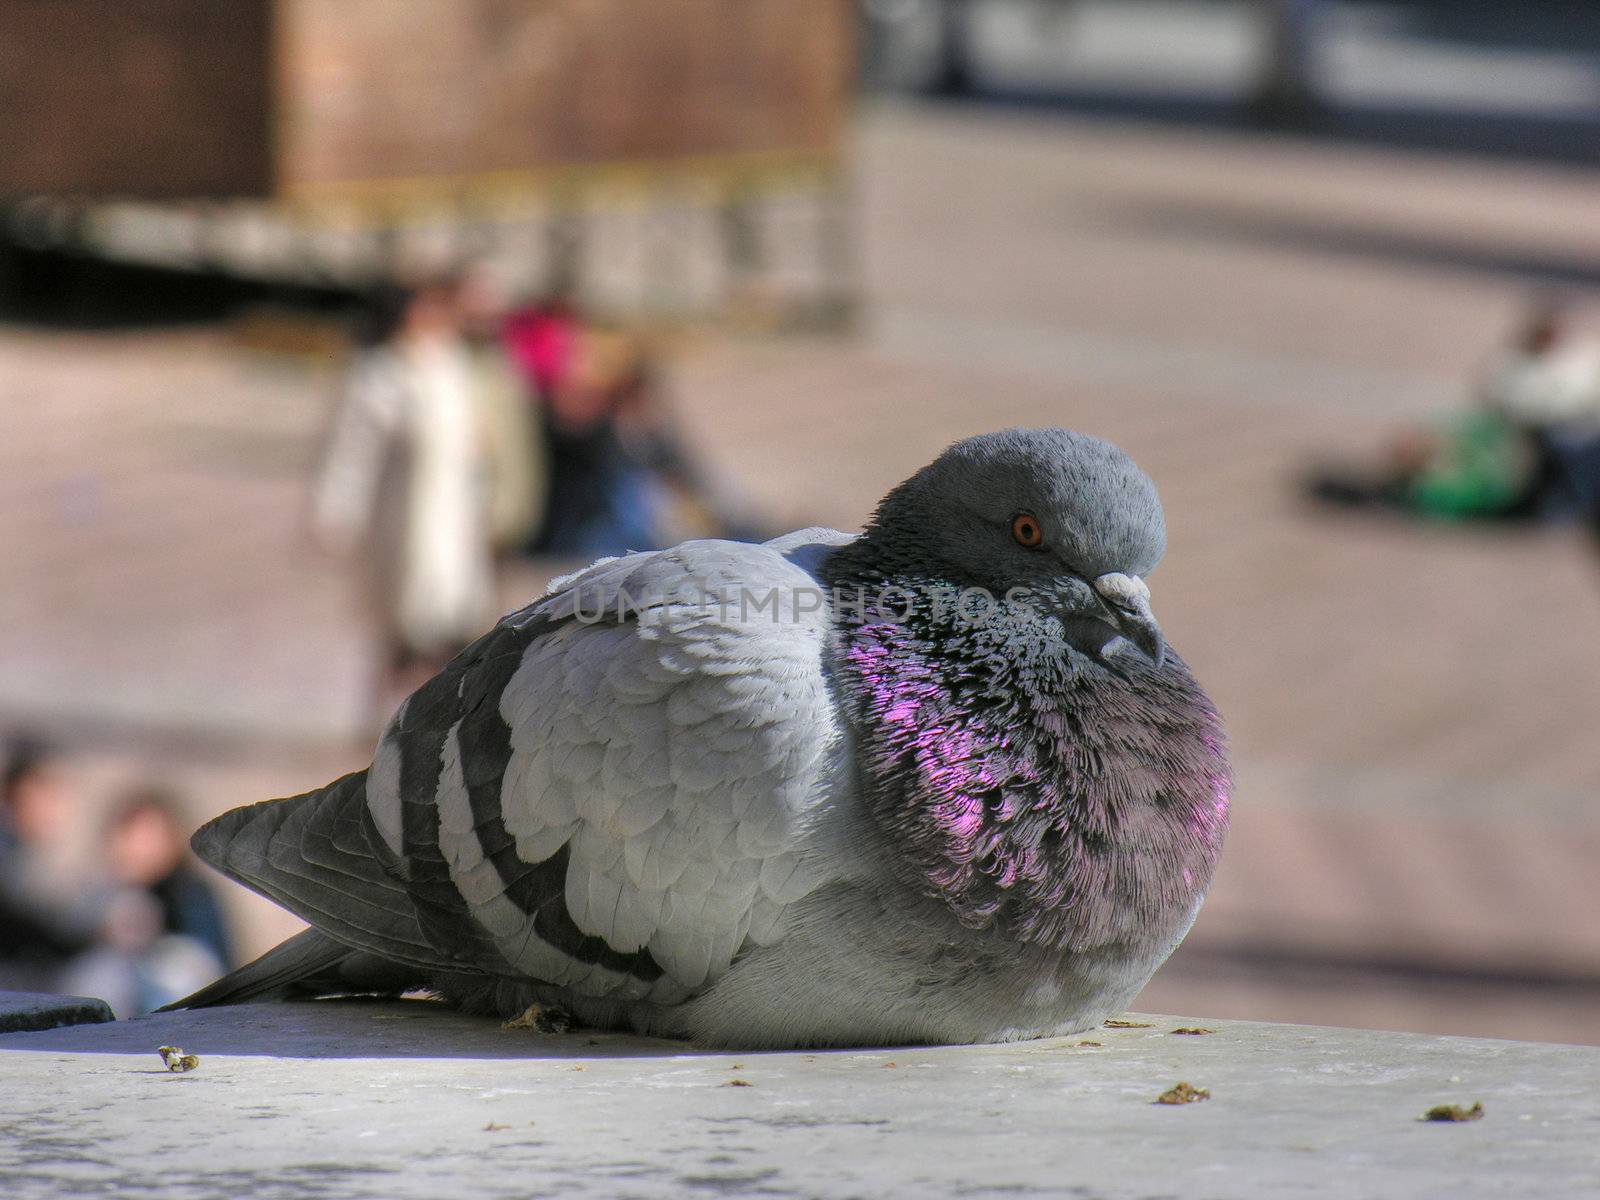 Pigeon in Siena, Tuscany, Italy by jovannig